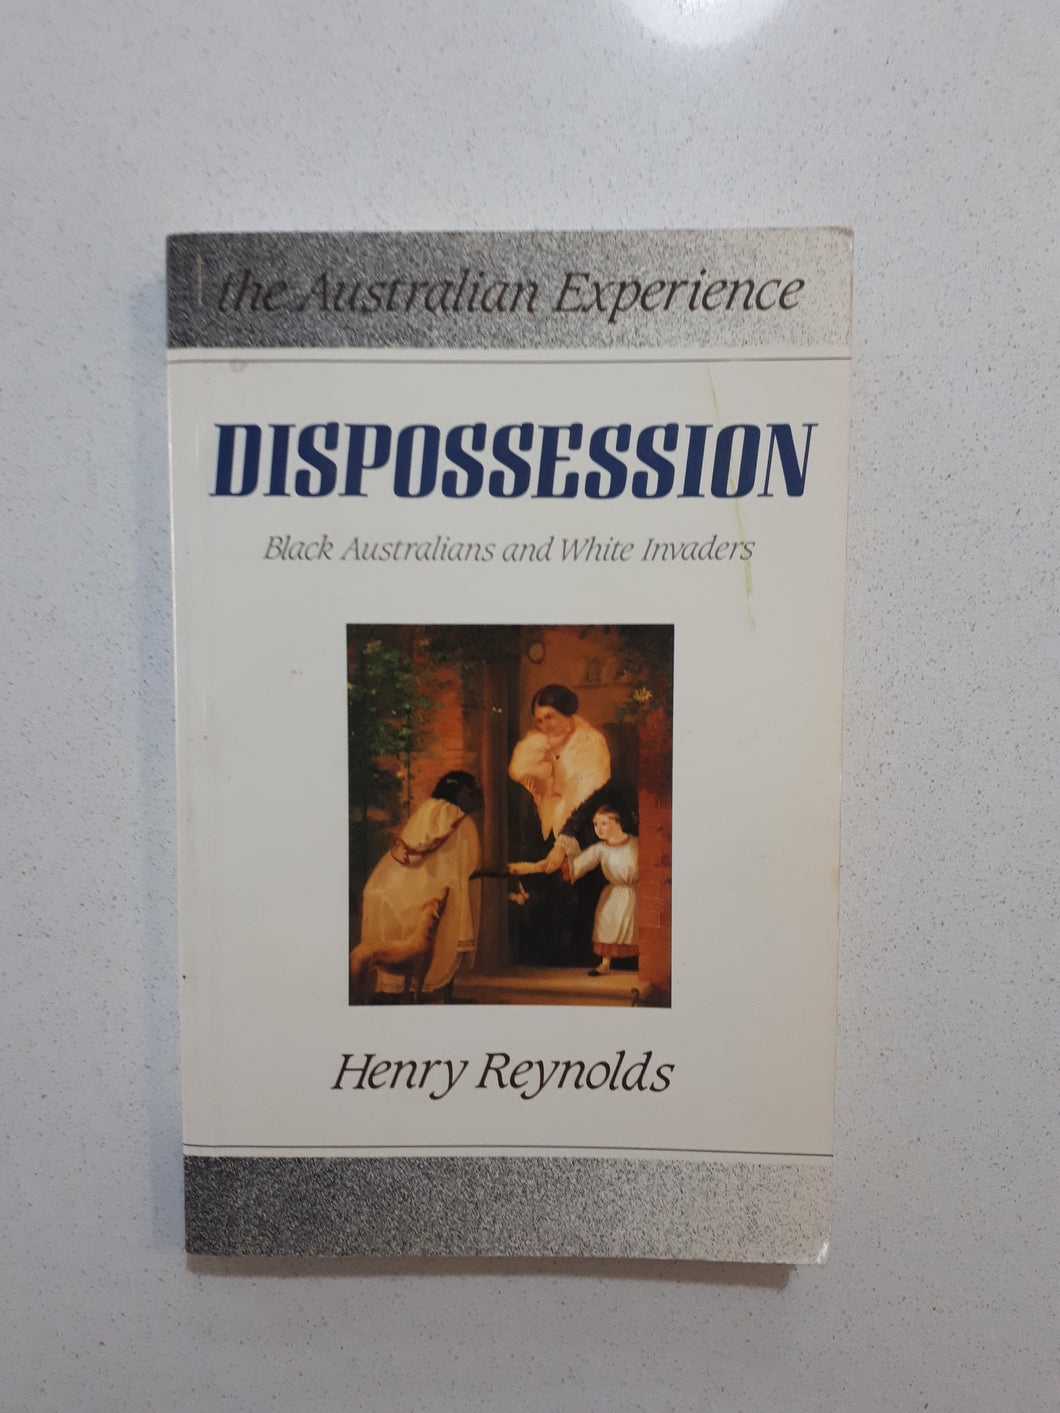 Dispossession - Black Australians and White Invaders by Henry Reynolds